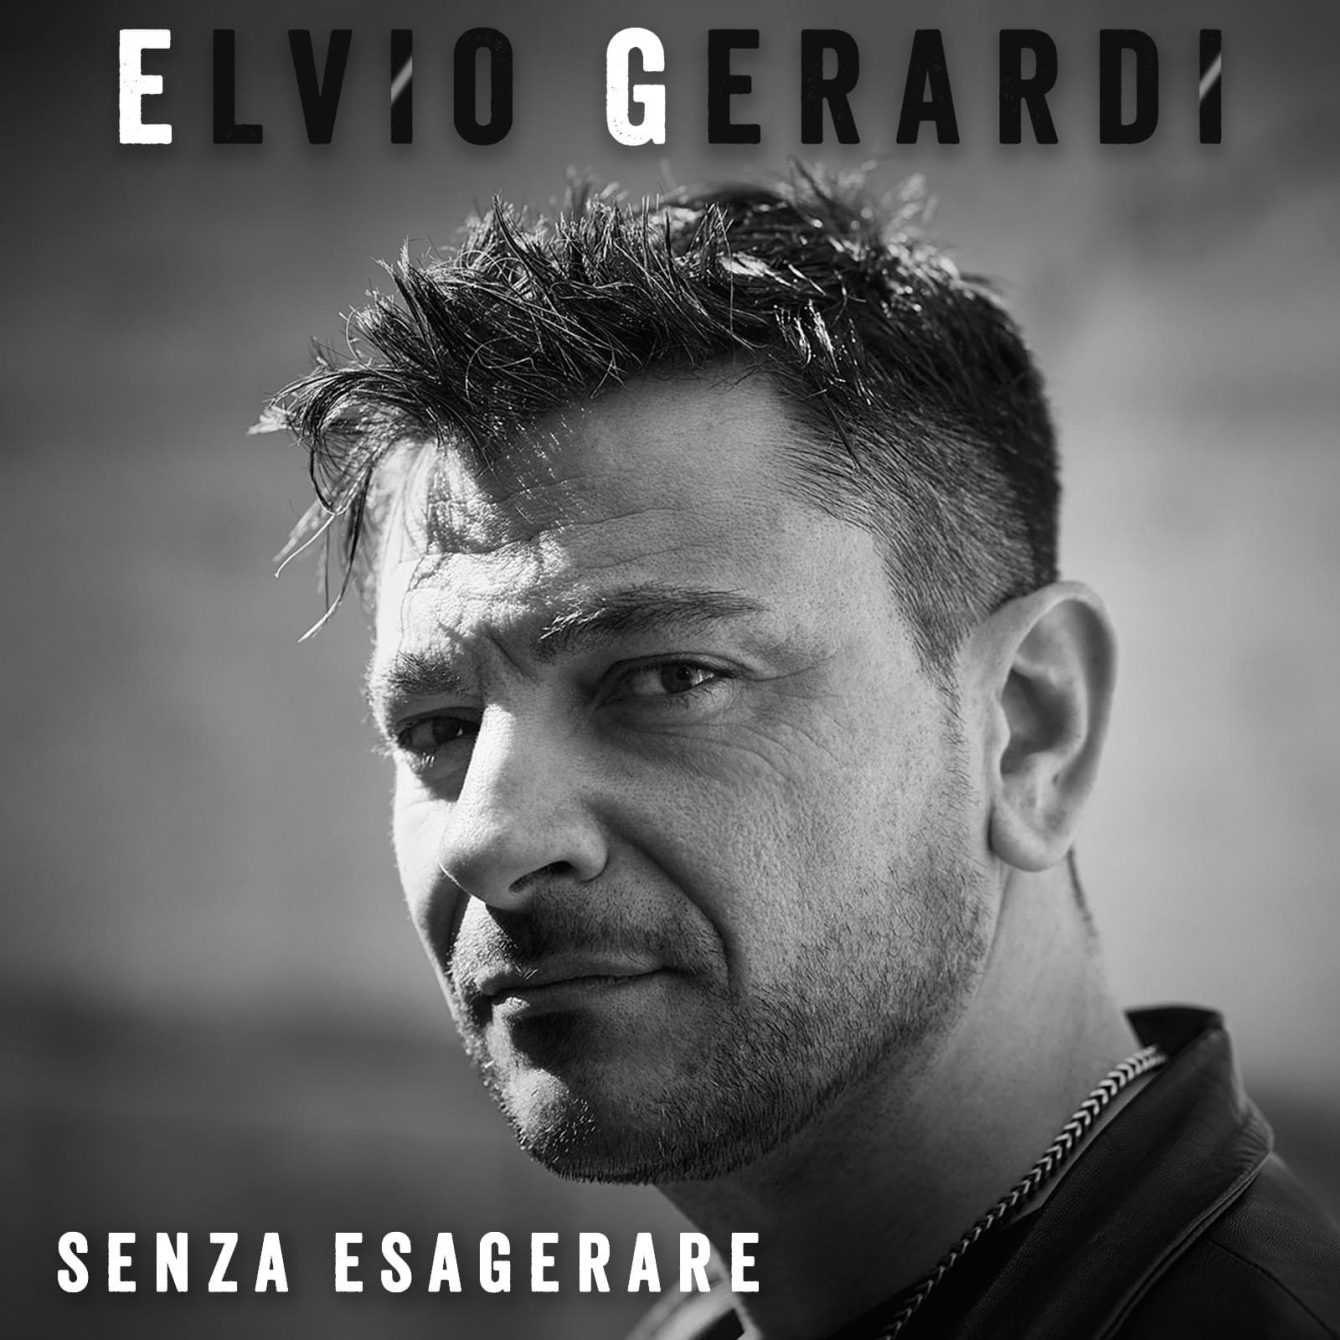 Interview with Elvio Gerardi: how much love for music drives you to make a dream come true